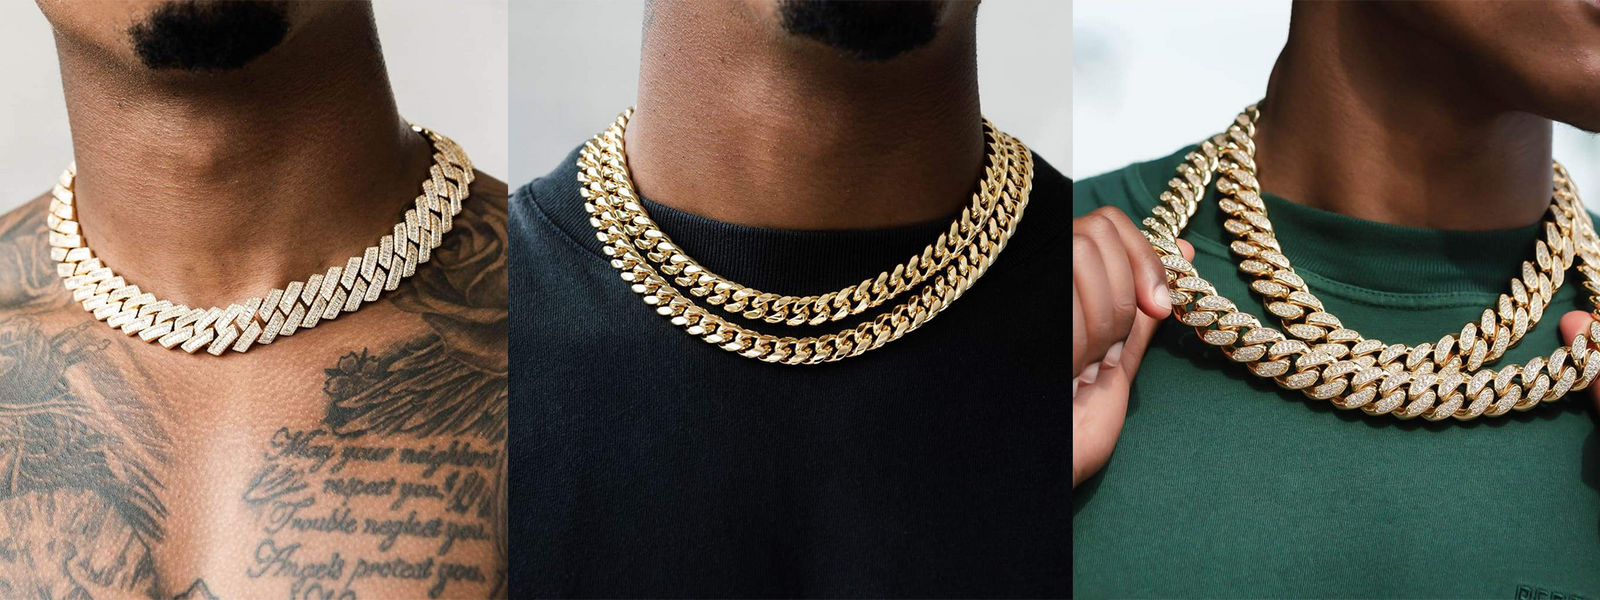 5mm Rope Chain | Hip Hop Jewelry | King Ice Solid Gold / 14K Gold / 22